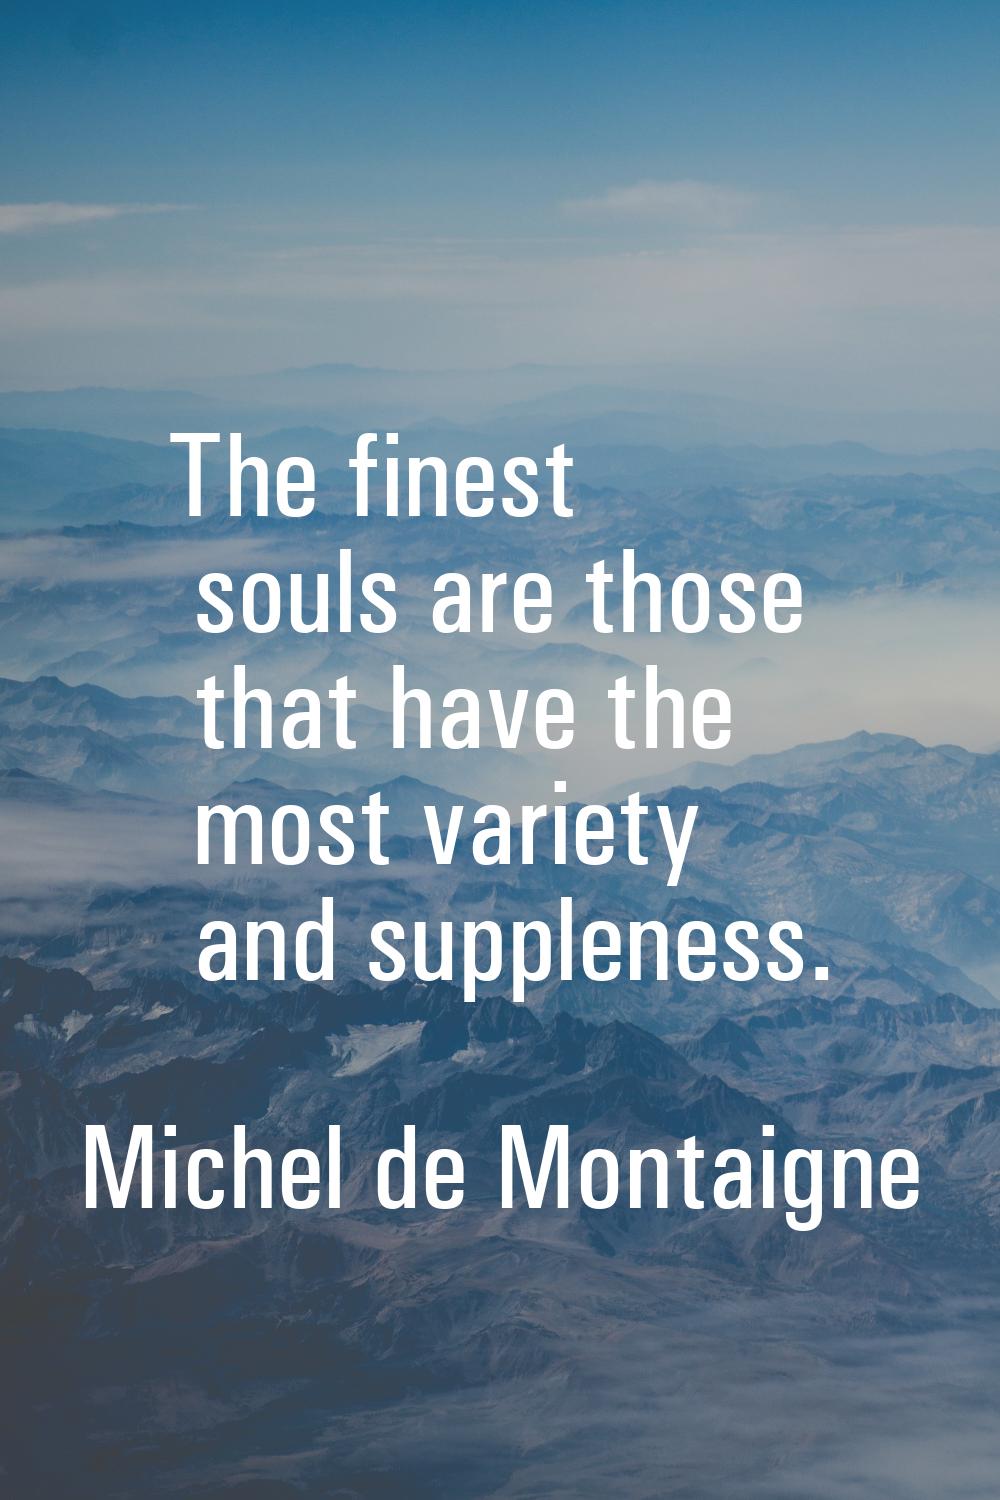 The finest souls are those that have the most variety and suppleness.